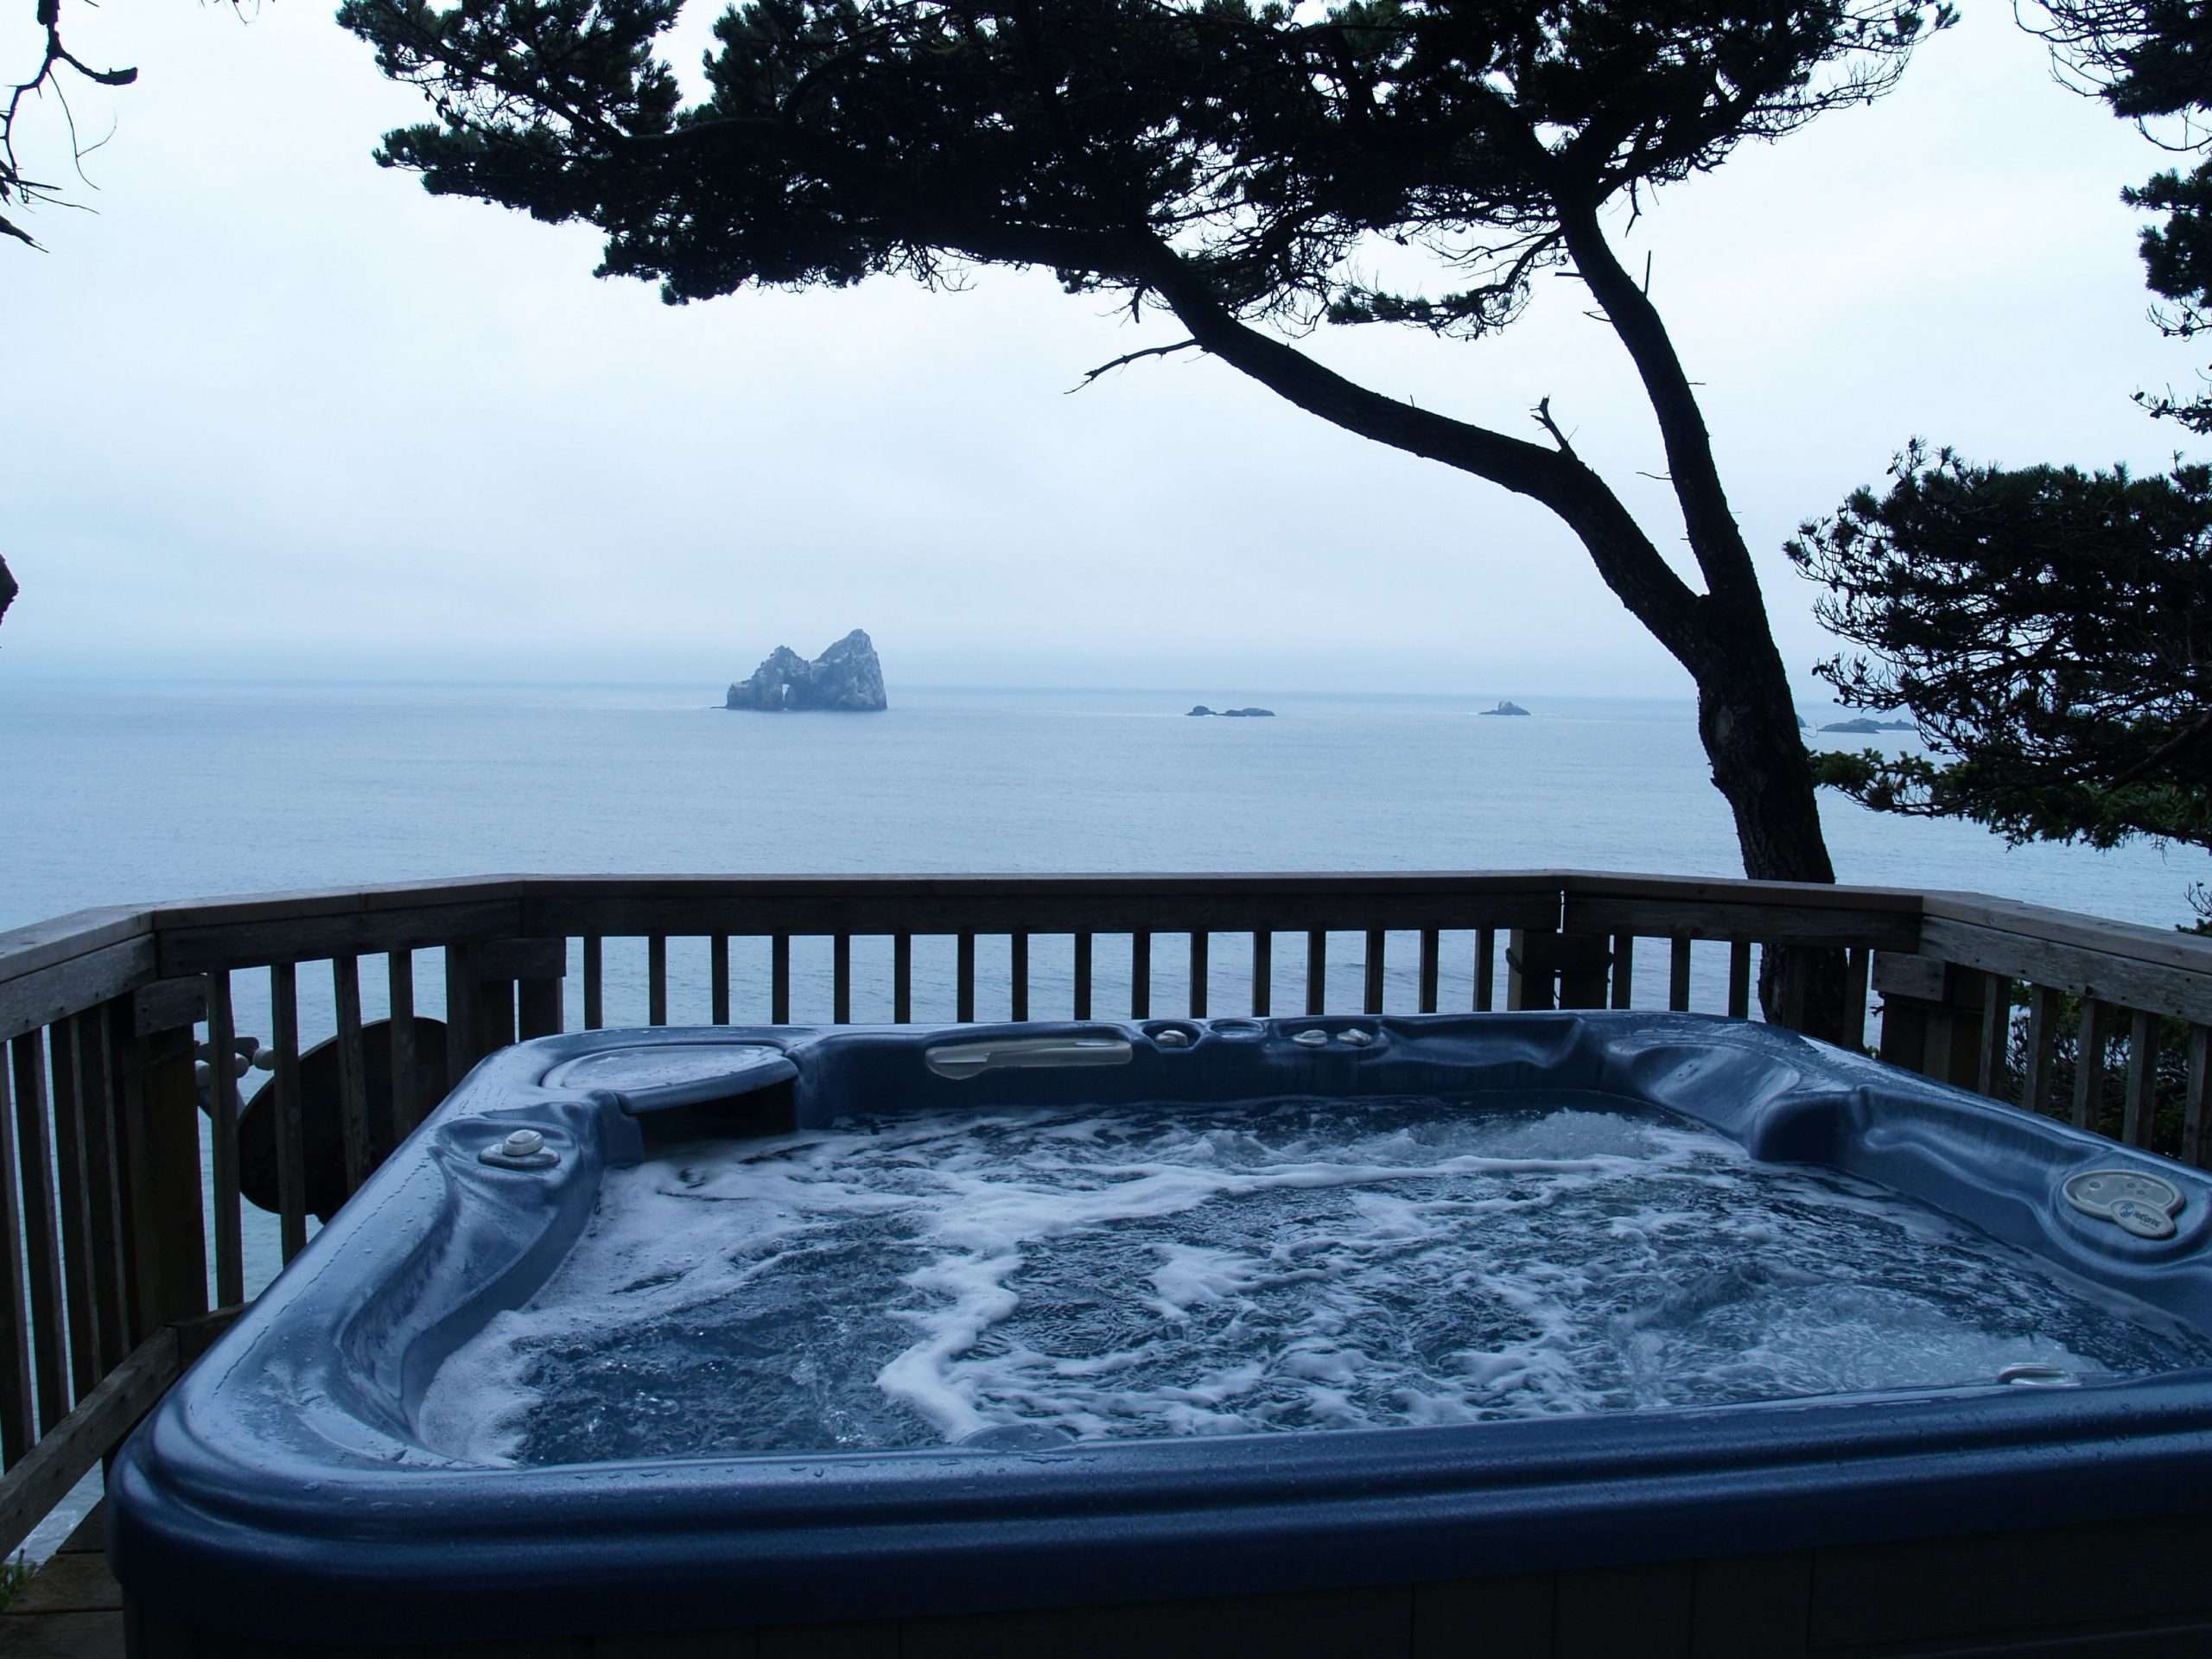 Honeymoon Cove Private Vacation Rental and Hot tub.